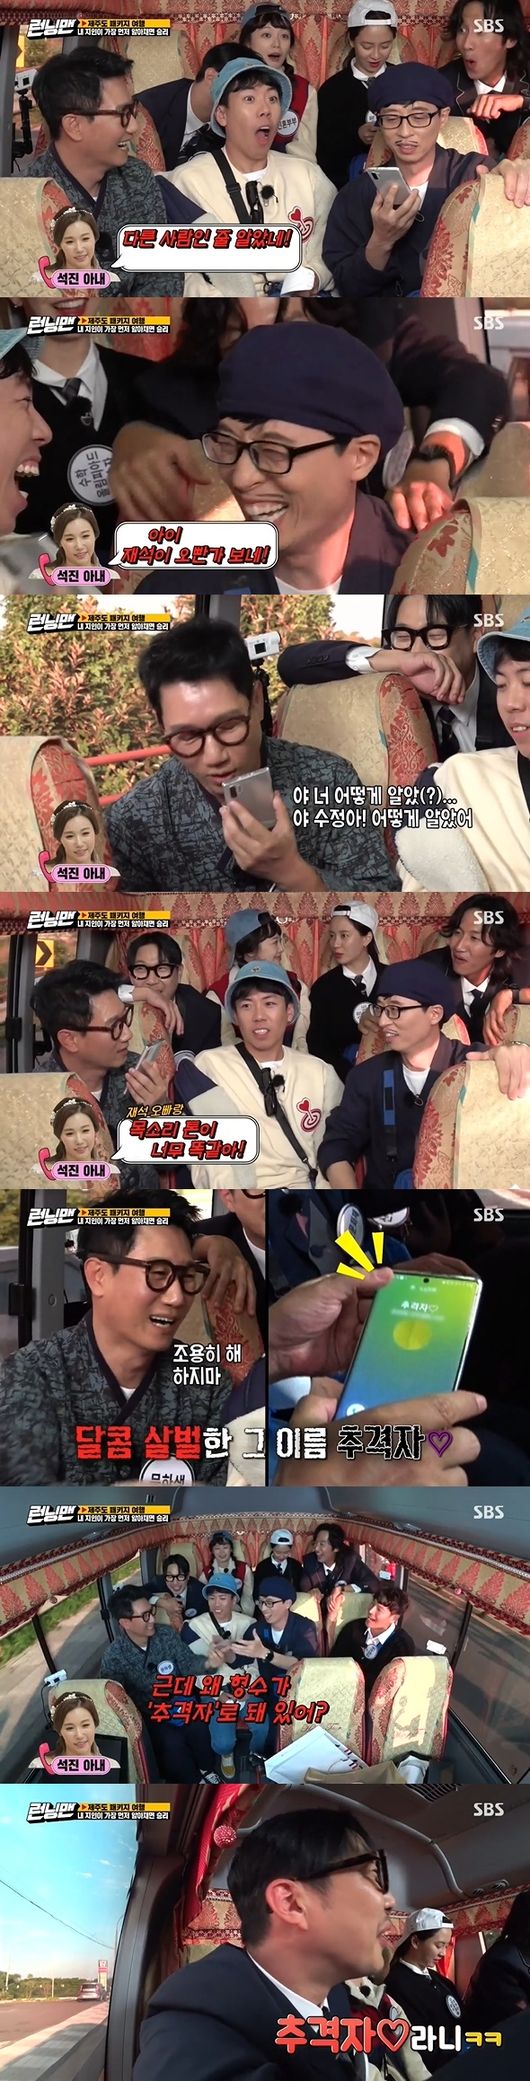 Ji Suk-jin saved his wife as The Chaser and laughed.On SBS entertainment Running Man broadcasted on the afternoon of the 8th, Ji Suk-jin was released as a The Chaser on his cell phone.The second mission, Hello, its me, wins when you call and notice that my acquaintance is not me first.Before starting the Bonn mission, Ji Suk-jins wife called her husband, and Yoo Jae-Suk answered the phone instead.Yoo Jae-Suk began acting as Ji Suk-jin, and Ji Suk-jins wife said, Au voice was a surprise: I thought it was someone else.Im going to go now after its over, he said.Yoo Jae-Suk asked, How did you hit it today? And Ji Suk-jins wife laughed when she replied, Ai ~ Jaeseok is my brother.Ji Suk-jin asked, How did you know, Sujeong? and the wife replied, The two have so much the same tone of voice, but how are you together? Is it a shoot today?My husband came to Jeju Island, and Running Man was the first time.At this time, Running Man sisters said, But why is your sister-in-law stored in The Chaser on your cell phone?I wondered, and the embarrassed Ji Suk-jin said, Lets talk about it. Meanwhile, Ji Suk-jins wife Ryu Su-jeong is eight years younger than her husband and boasts beautiful looks as good as celebrities.As a stylist, Yoo Jae-Suk introduced it in the past, and Ji Suk-jin and marriage were introduced.Running Man screen captures